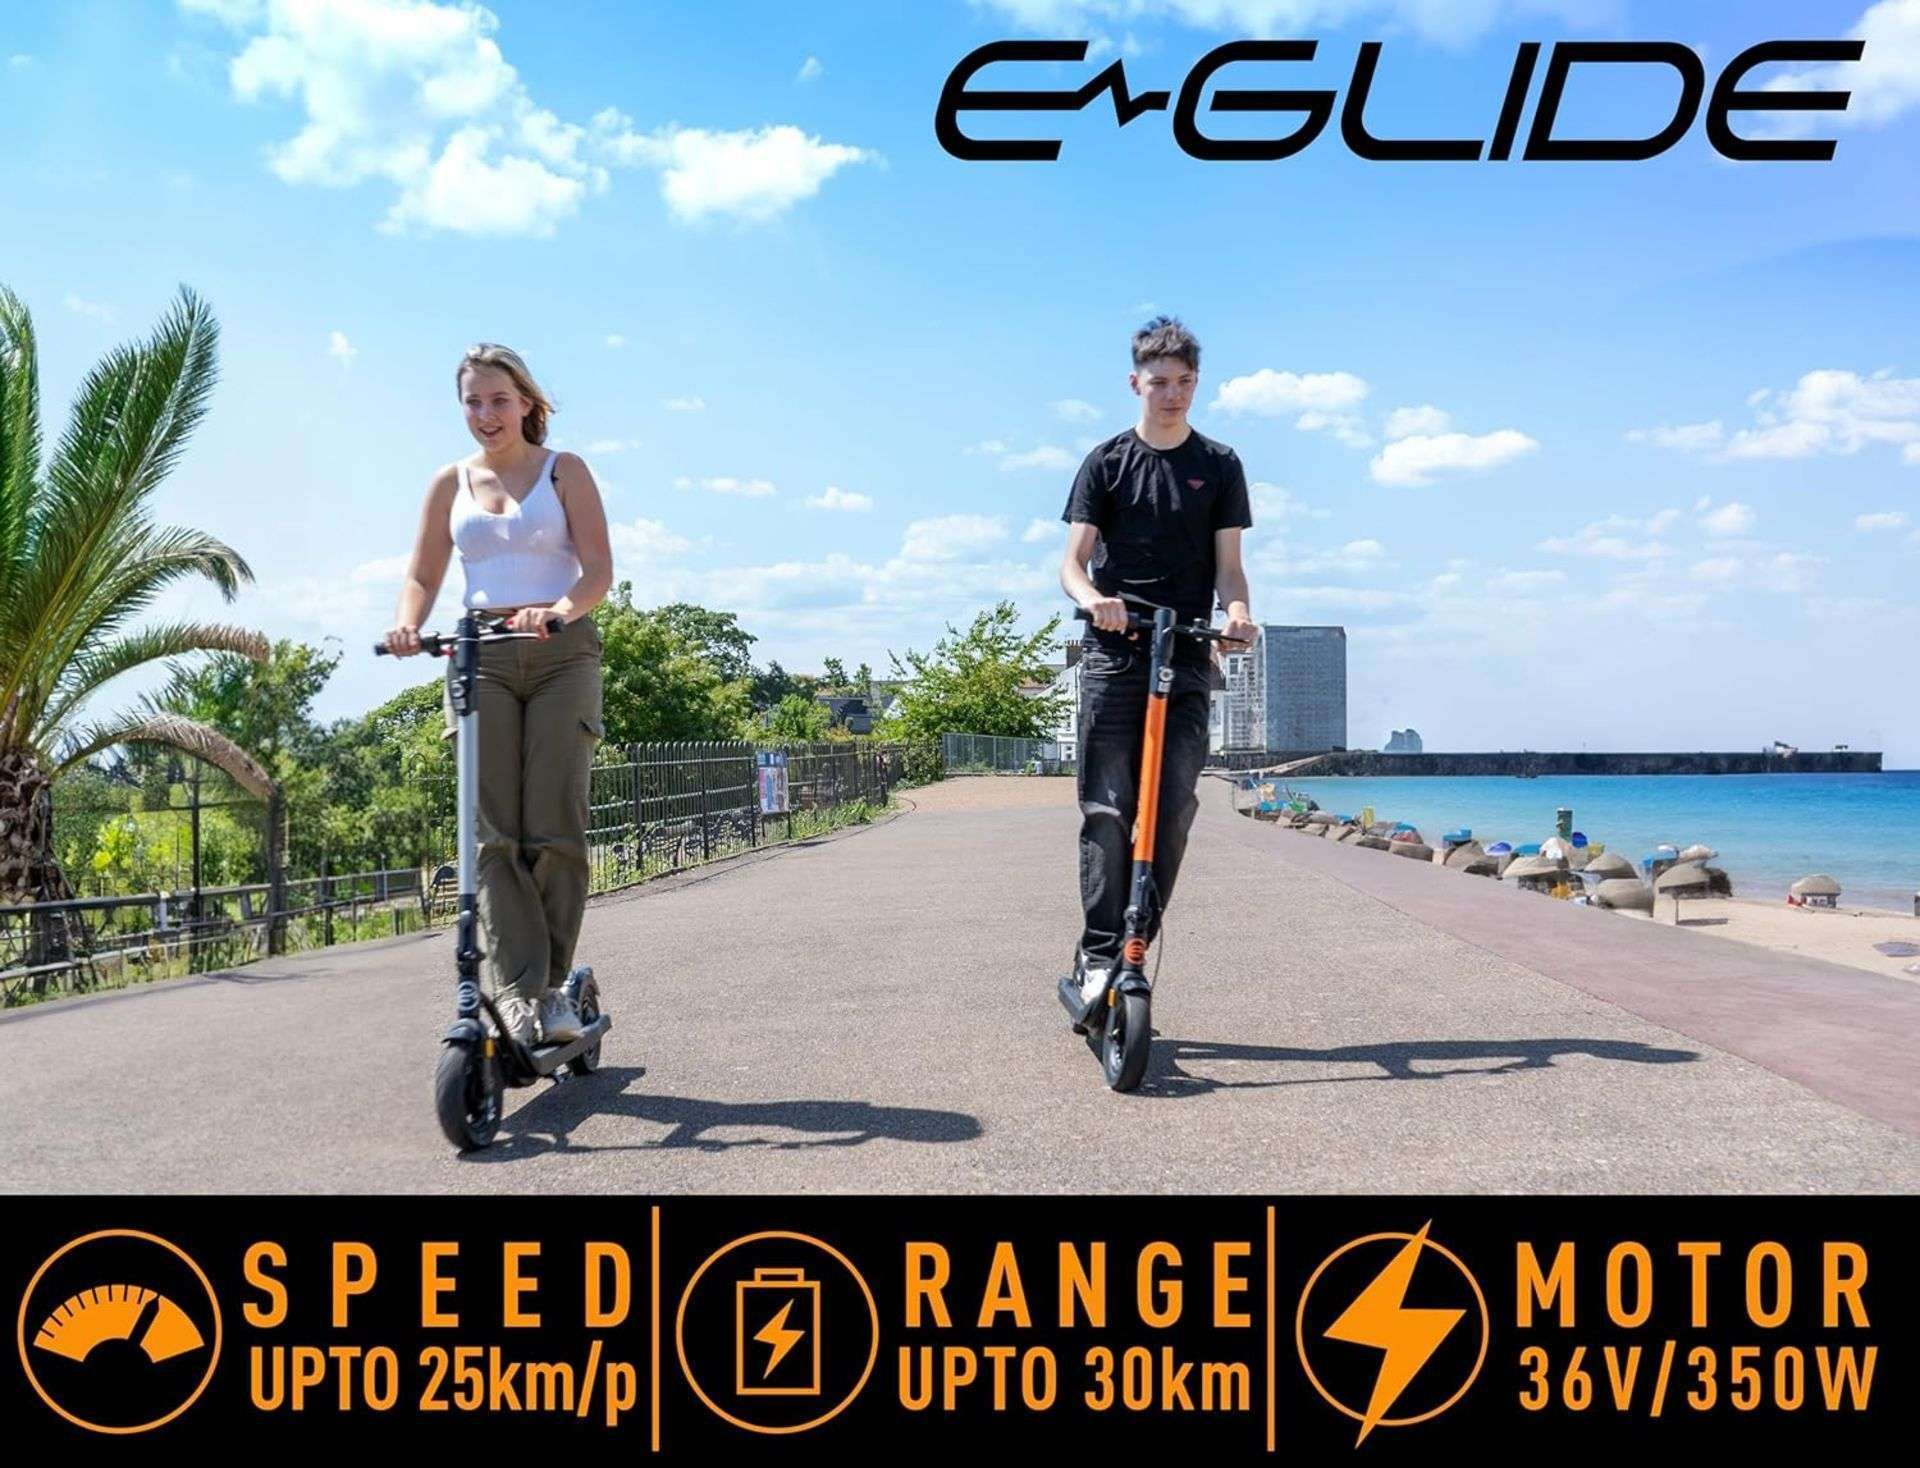 Brand New E-Glide V2 Electric Scooter Orange and Black RRP £599, Introducing a sleek and efficient - Bild 3 aus 4